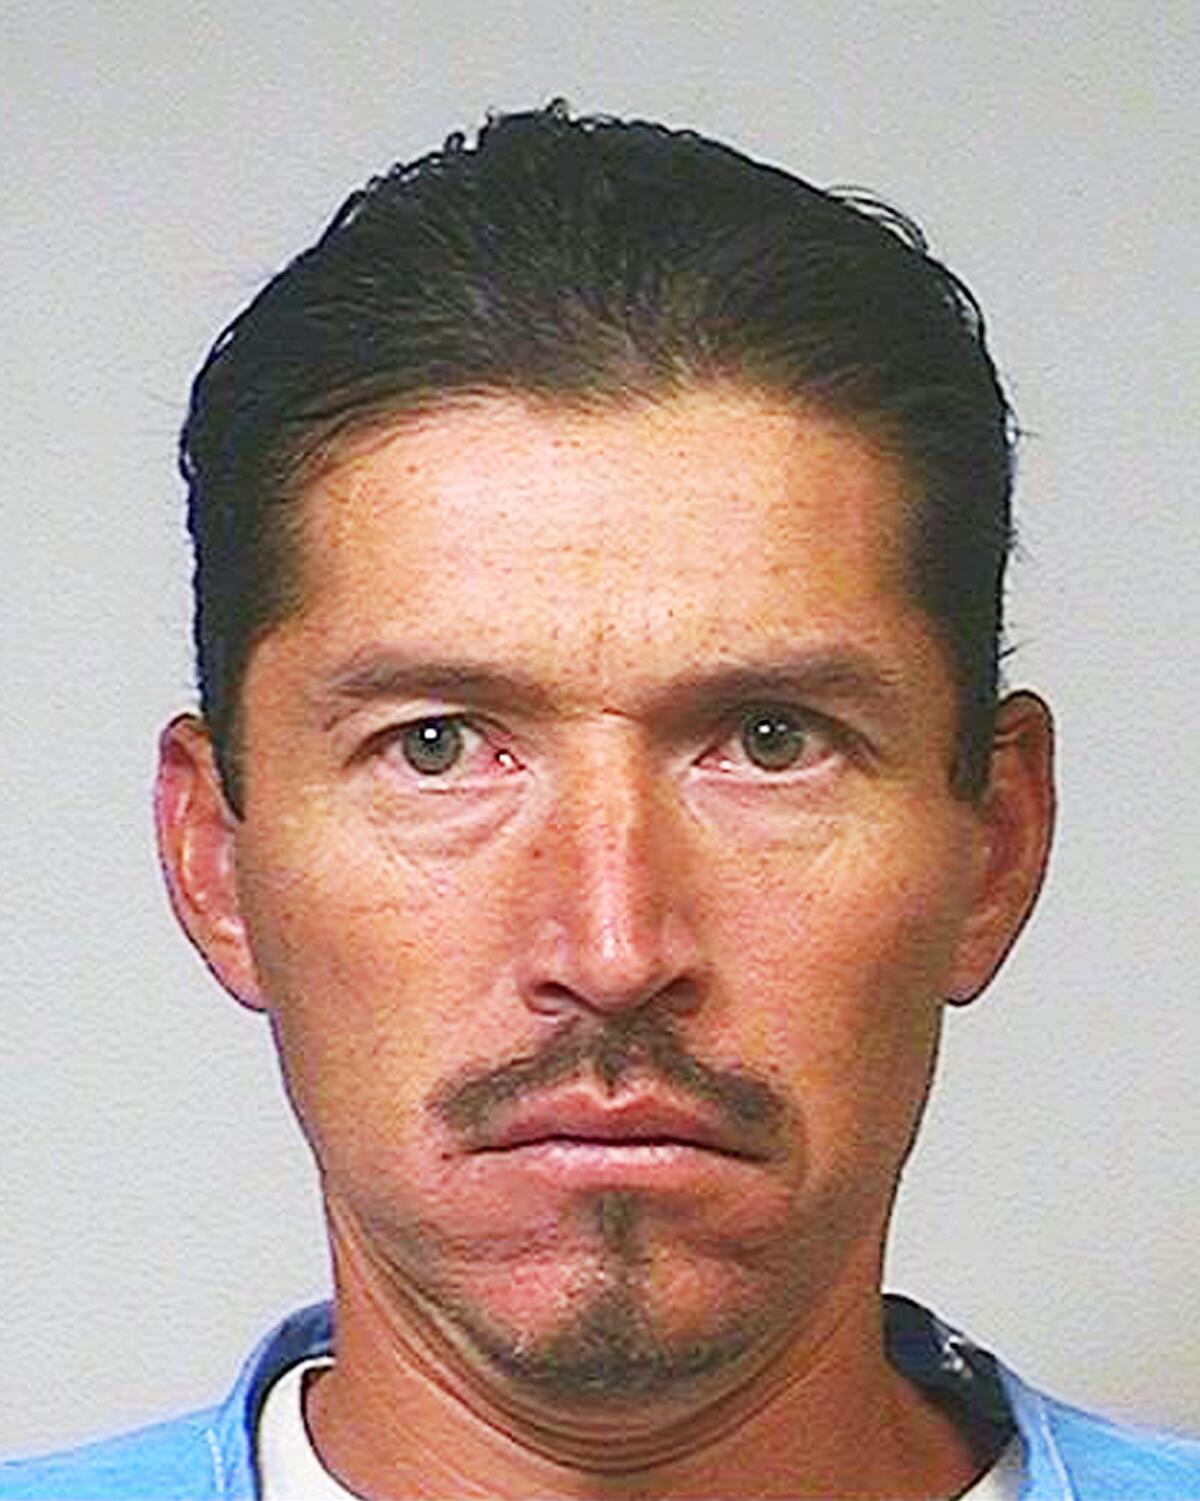 A close-up photo of a man with slicked-back hair, a moustache and a goatee.